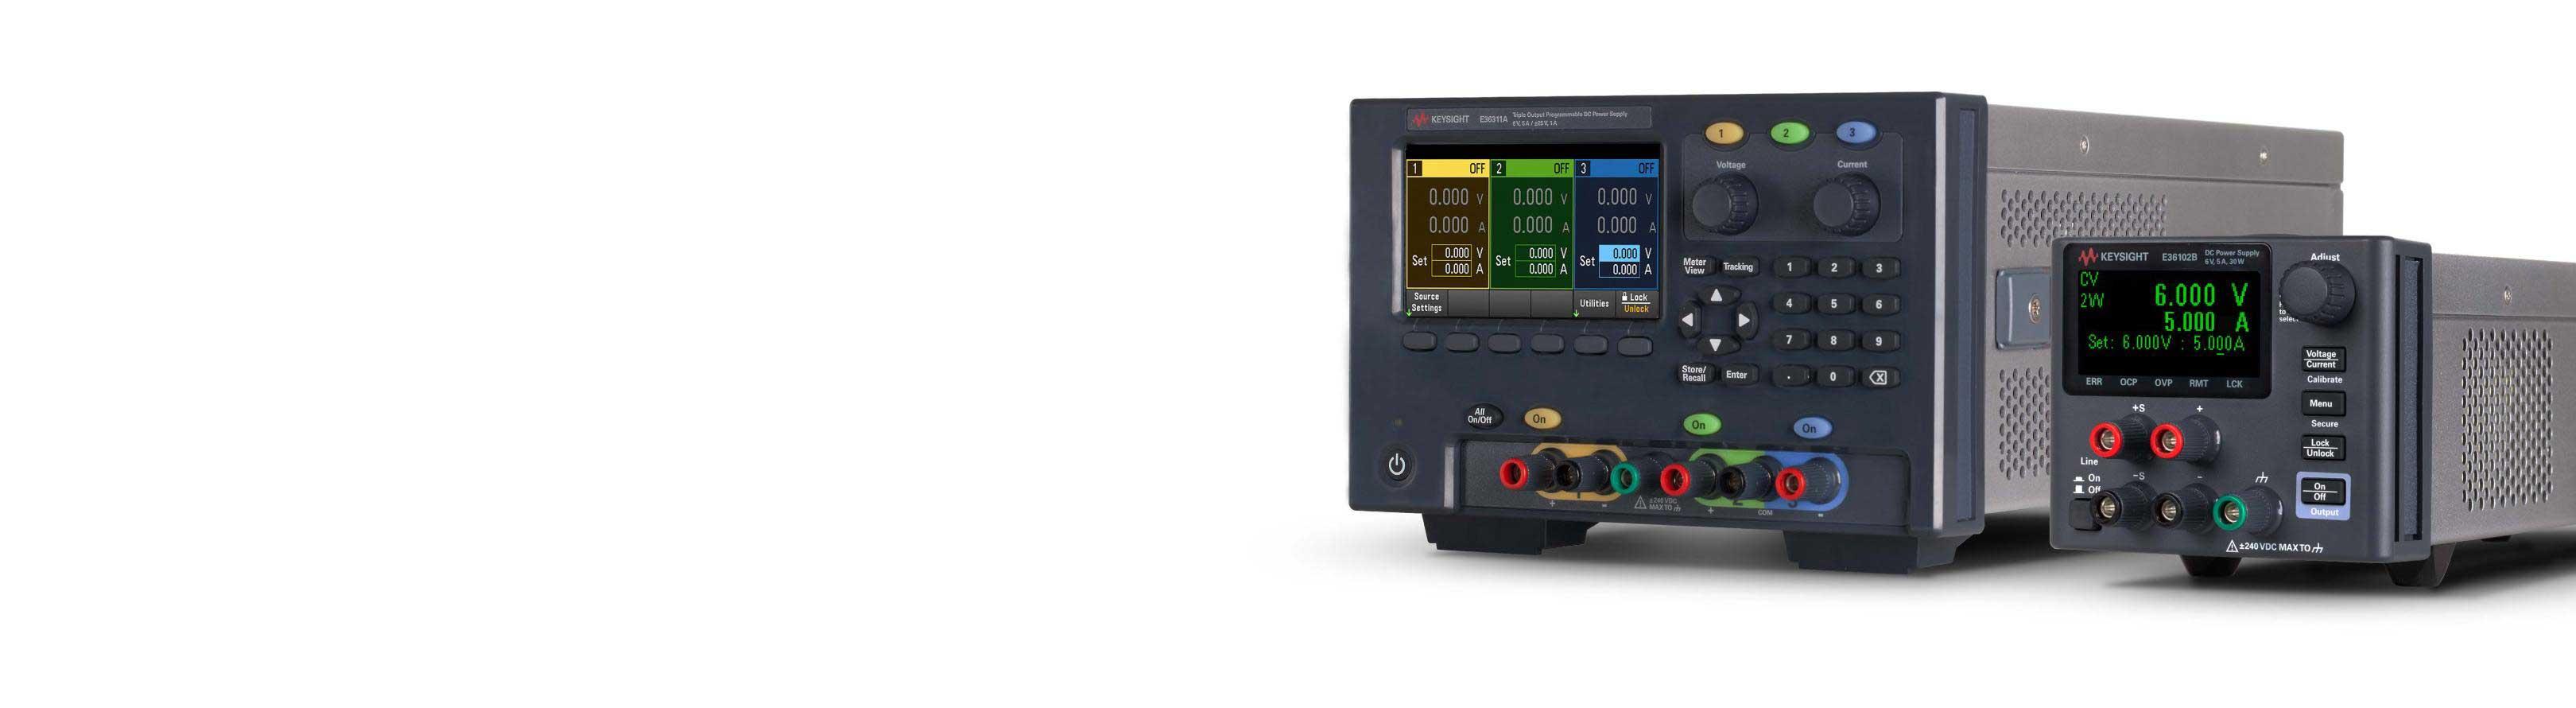 Power Supplies from Keysight for Industrial Applications